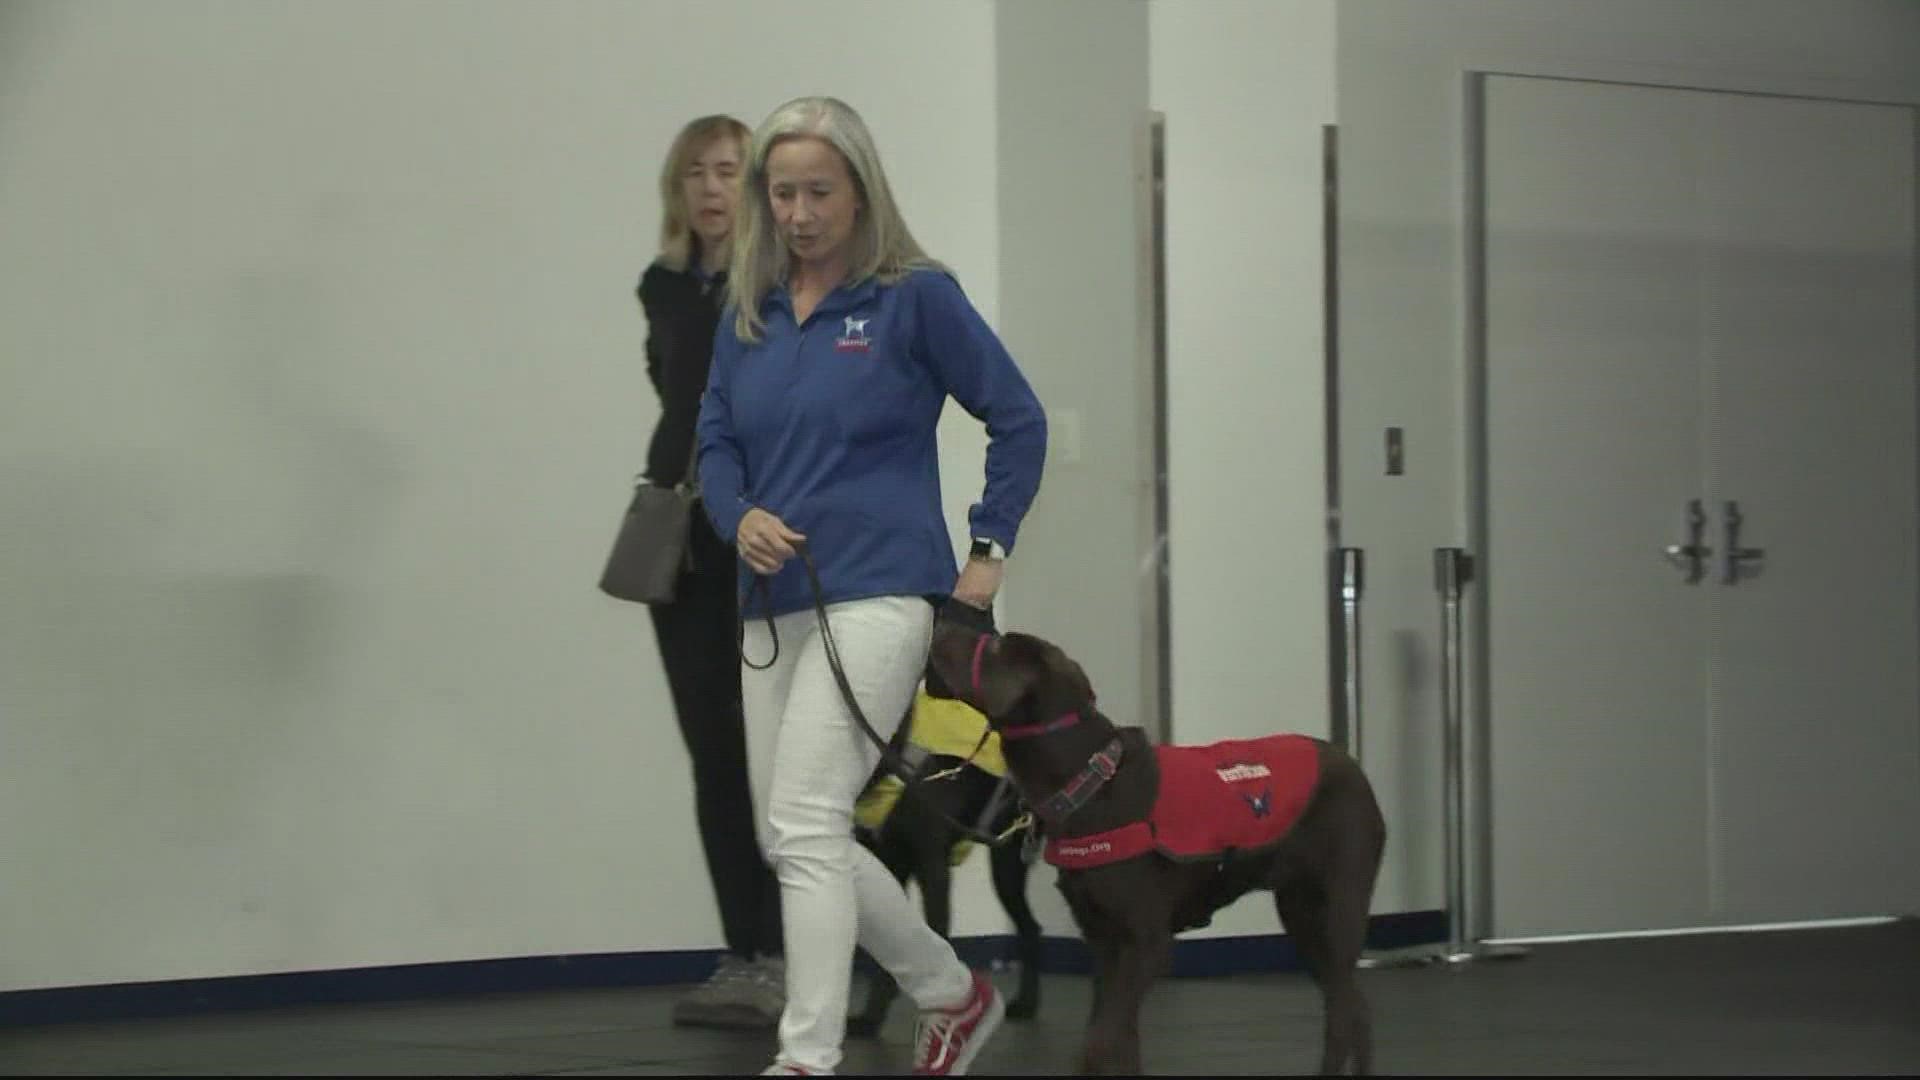 The puppies undergo training - including Washington Capitals' service dog Biscuit - in celebration of International Guide Dog Day.